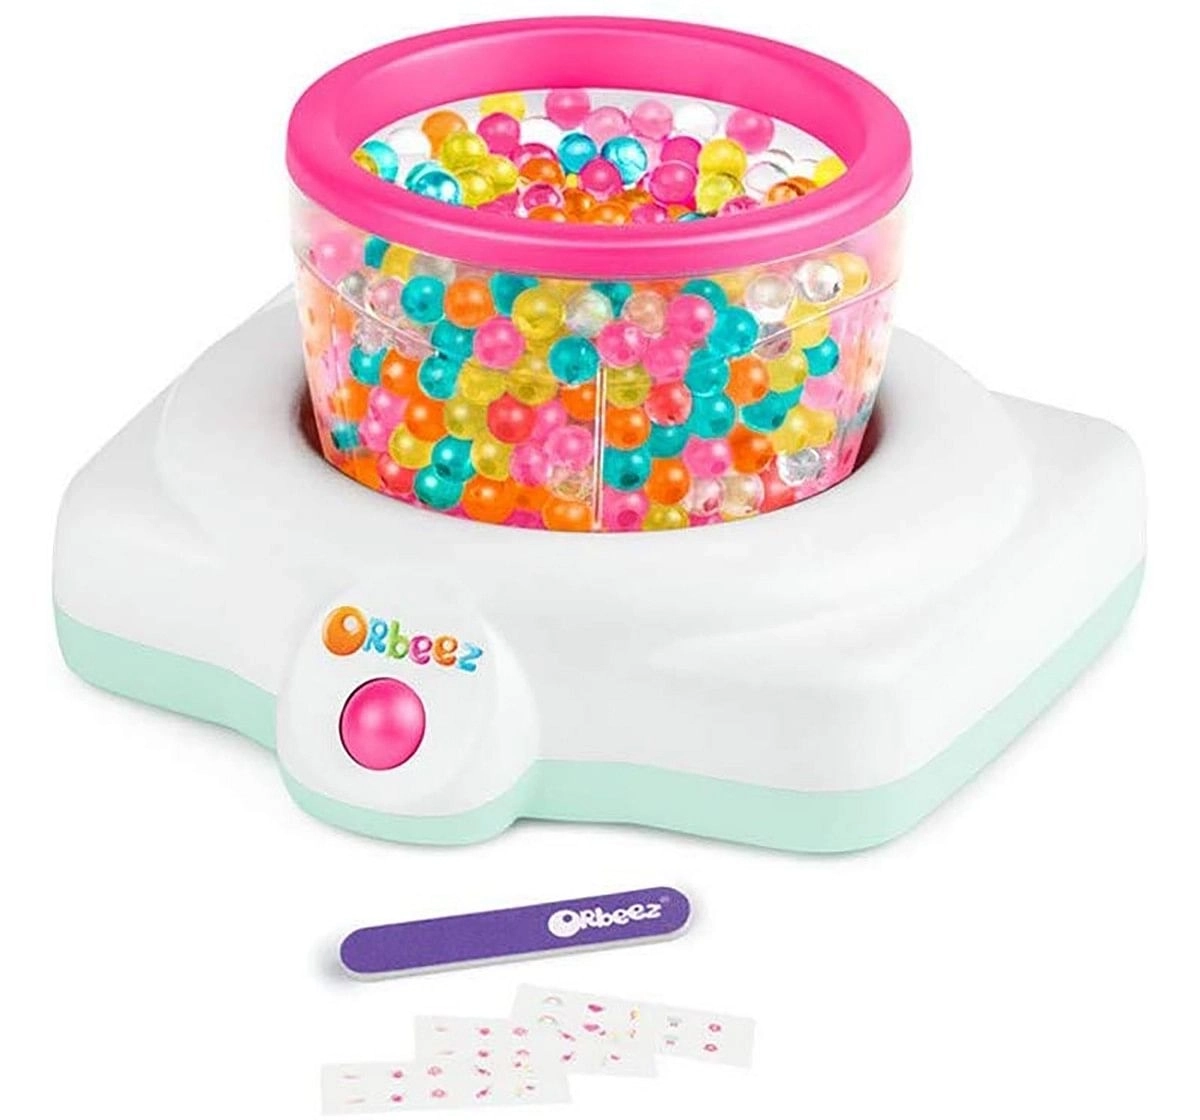 Orbeez Spin And Soothe Hand Spa DIY Art & Craft Kits for Kids age 5Y+ 